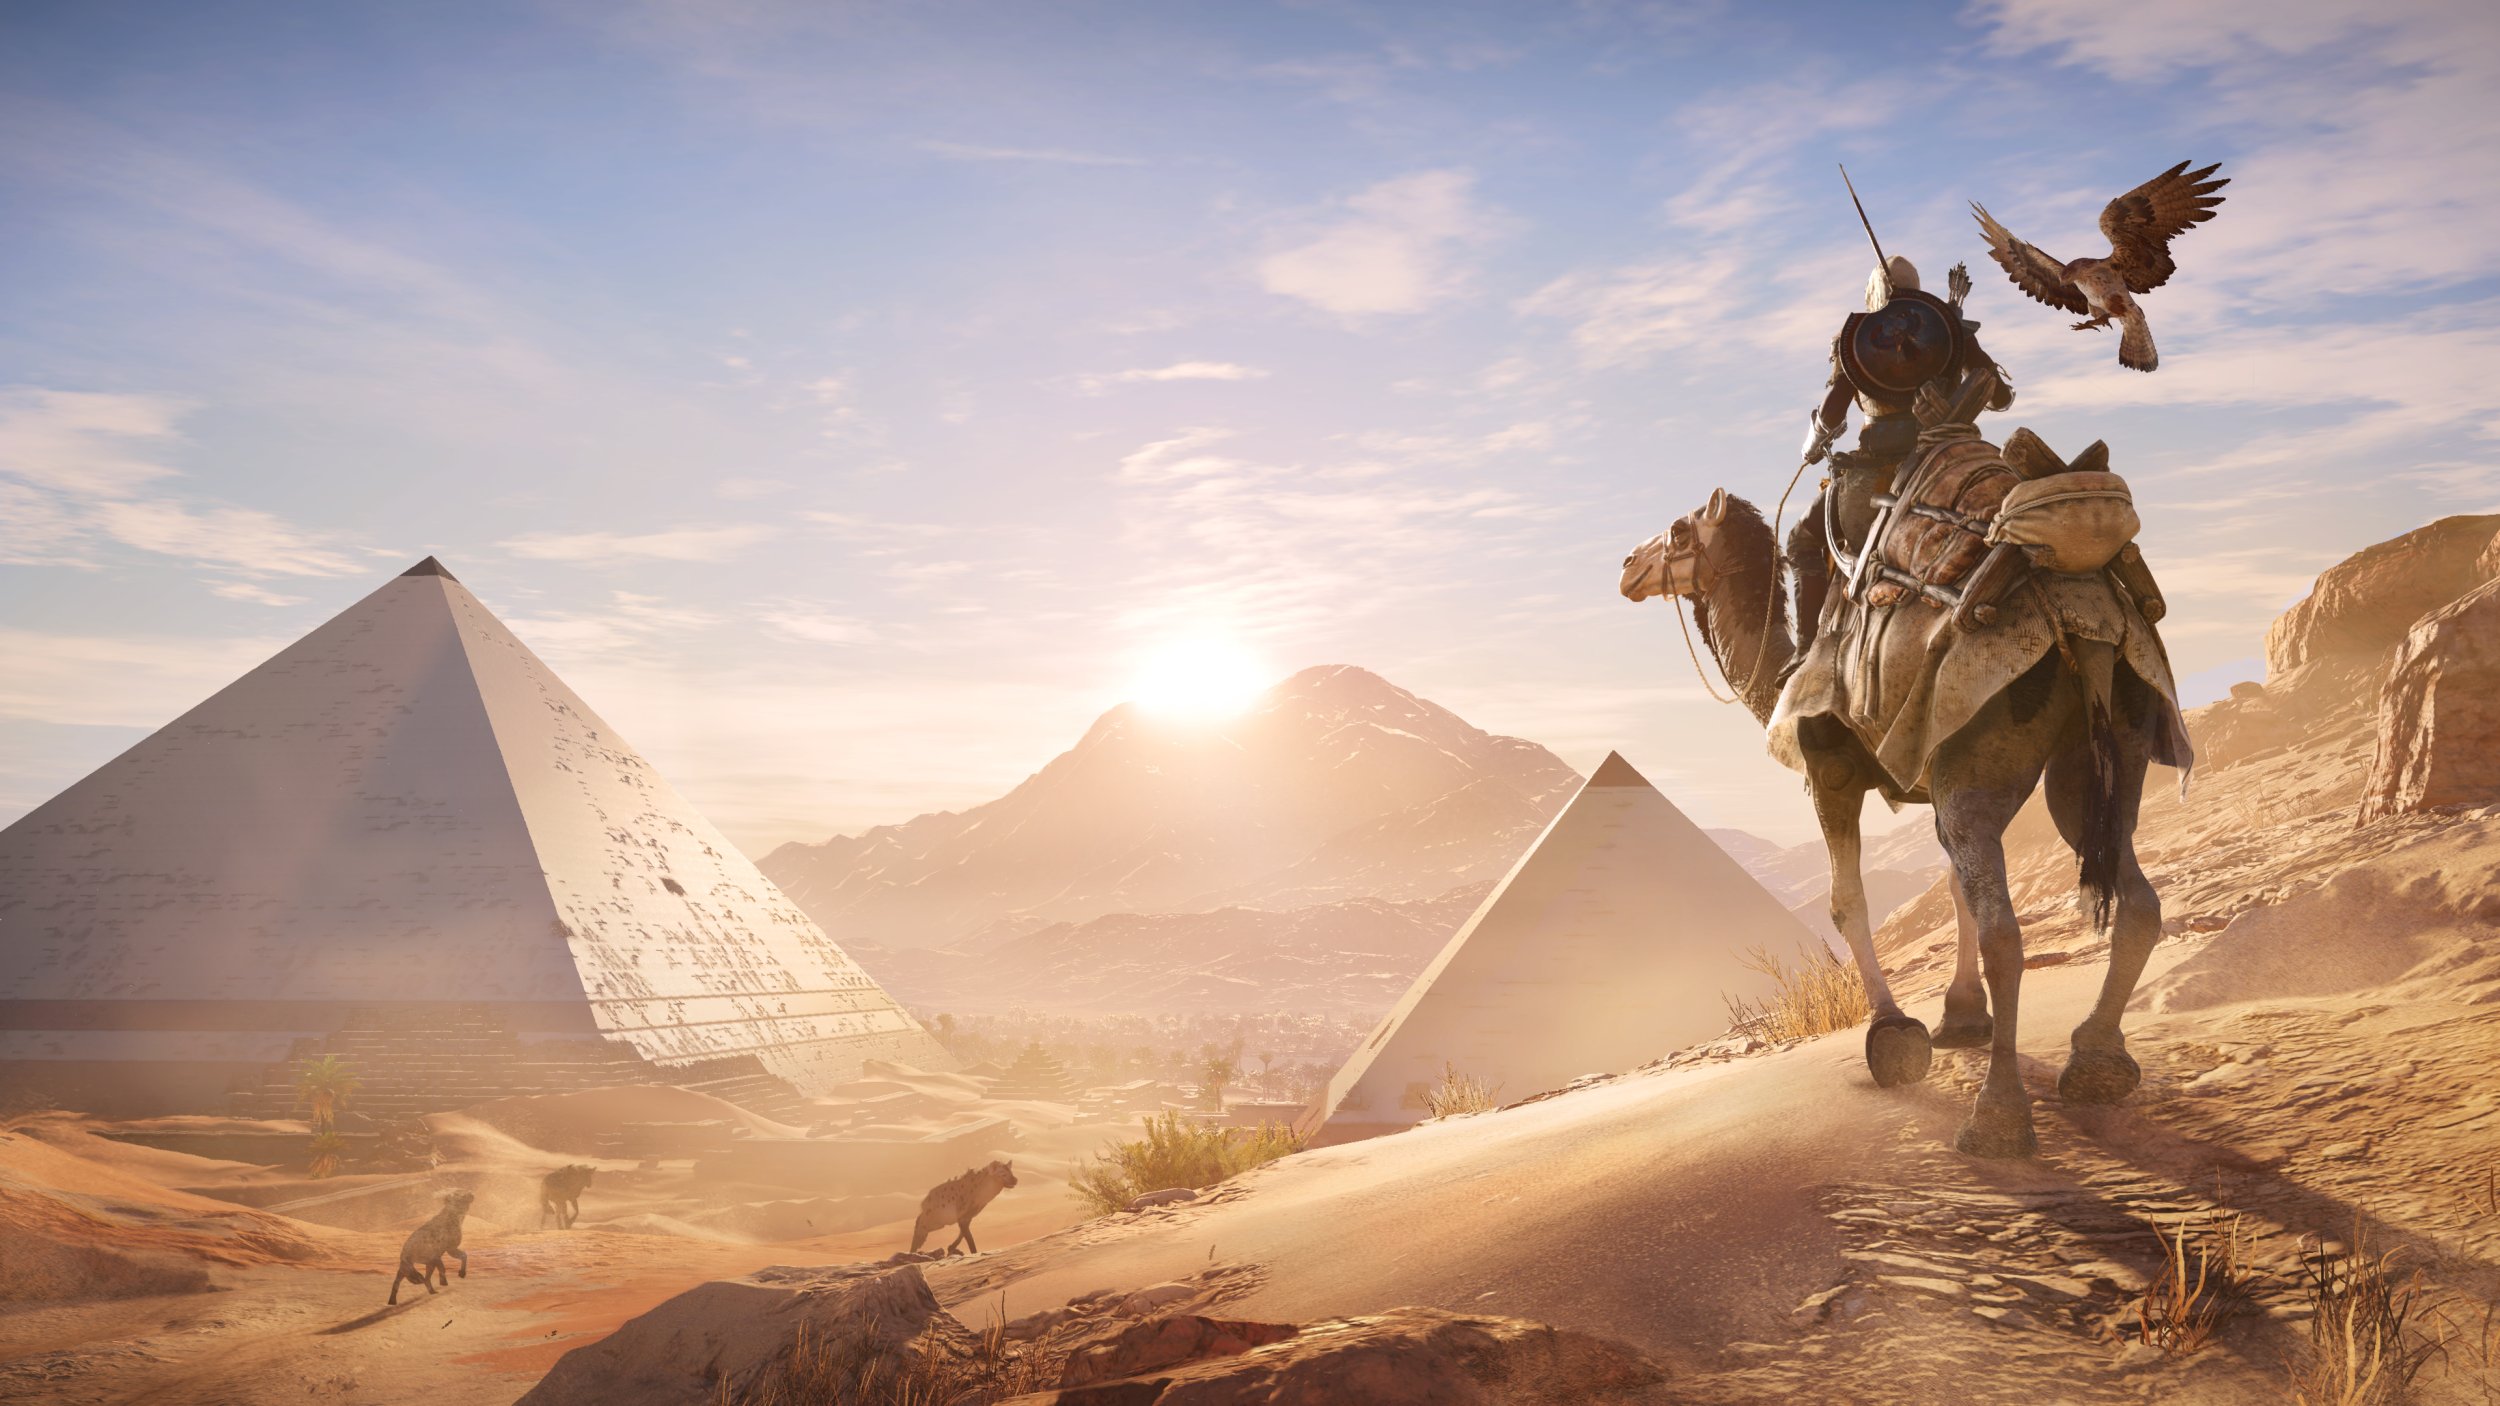 Assassin's Creed: Origins Adding Chocobo Horse Because Why Not